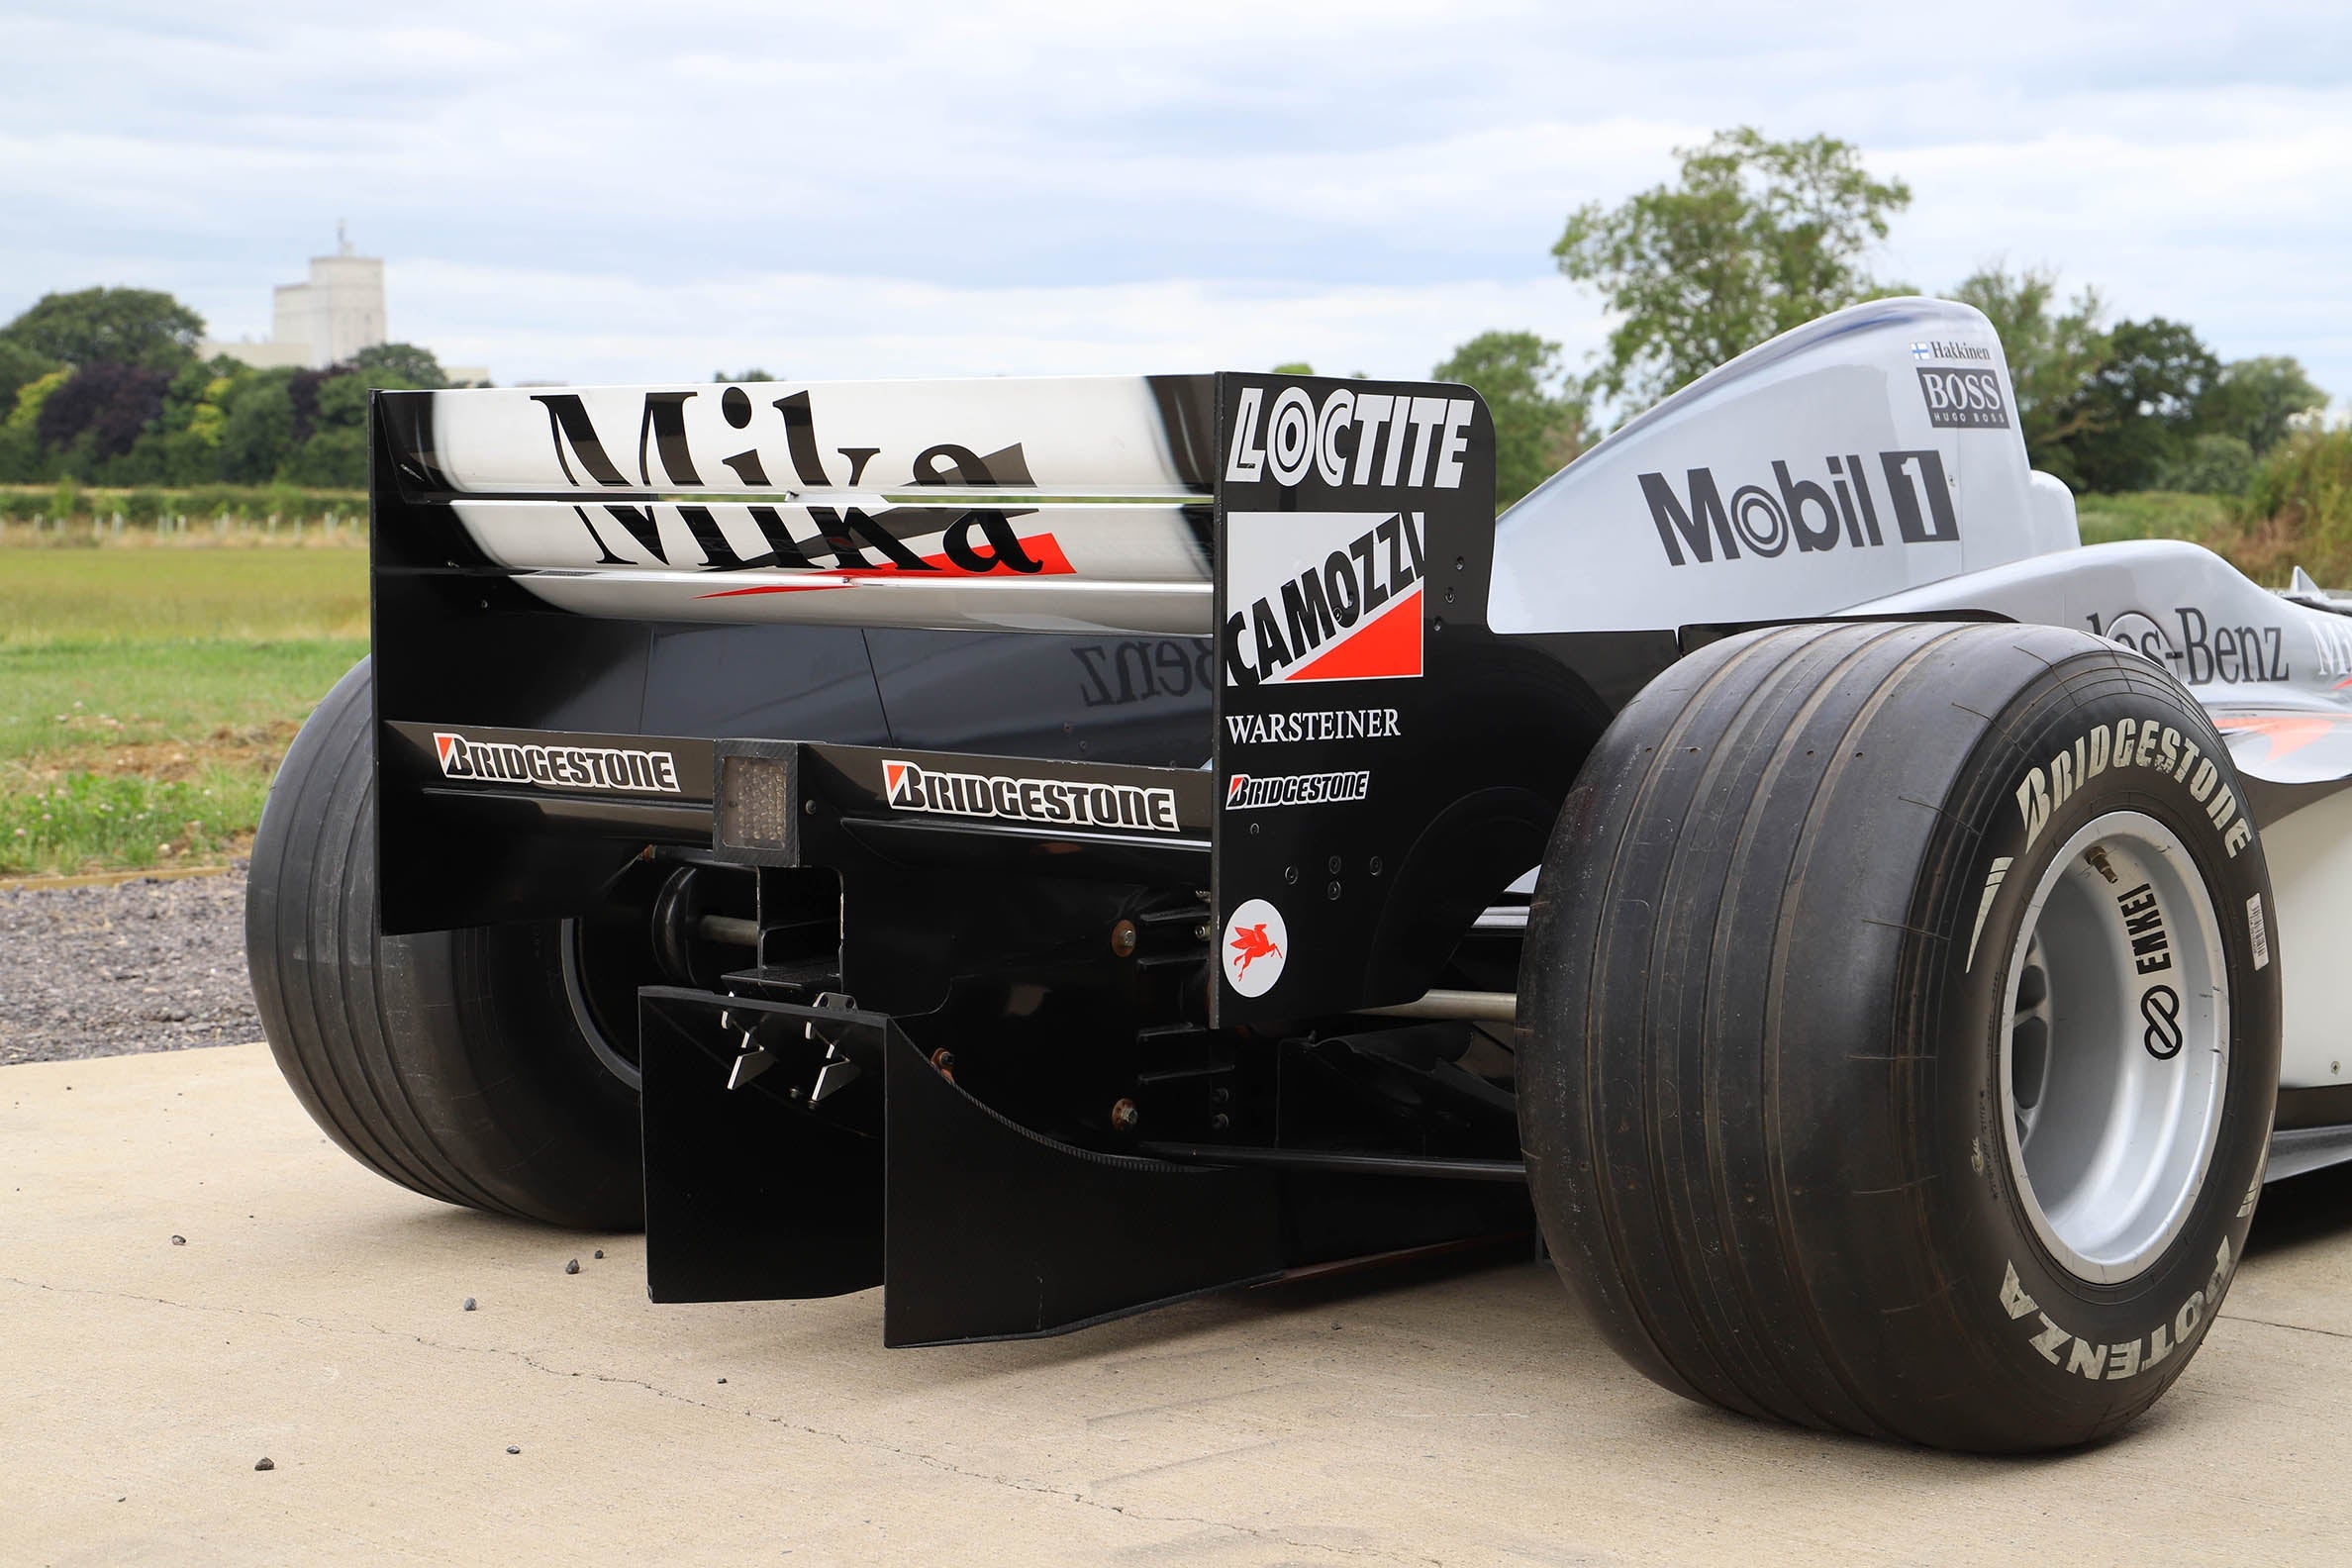 1997 McLaren MP4-12 Official Show Car With MP4-13 Livery